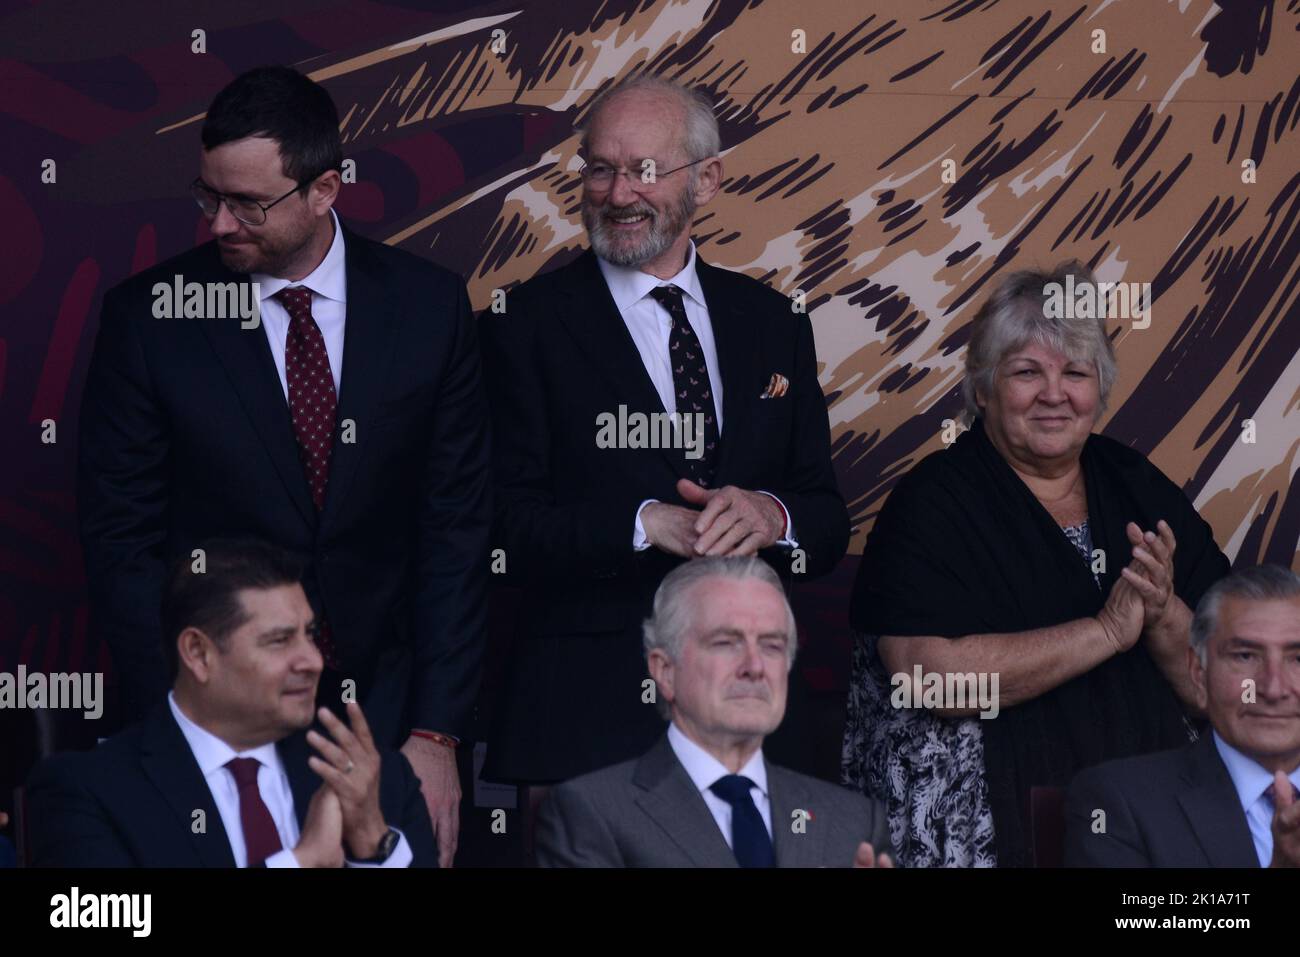 Mexico City, Mexico. 16th Sep, 2022. September 16, 2022, Mexico City, Mexico: John Shipton father of Julian Assange,  Gabriel Shipton brother of Julian Assange  and Aleida Guevara March, daughter of Ernesto 'Che' Guevara during the ceremony of the civic-military parade as part of the commemoration of the 212th Anniversary of the beginning of Mexico's Independence in the downtown. on September 16, 2022 in Mexico City, Mexico. (Photo by Carlos Tischler/ Eyepix Group) Credit: Eyepix Group/Alamy Live News Stock Photo